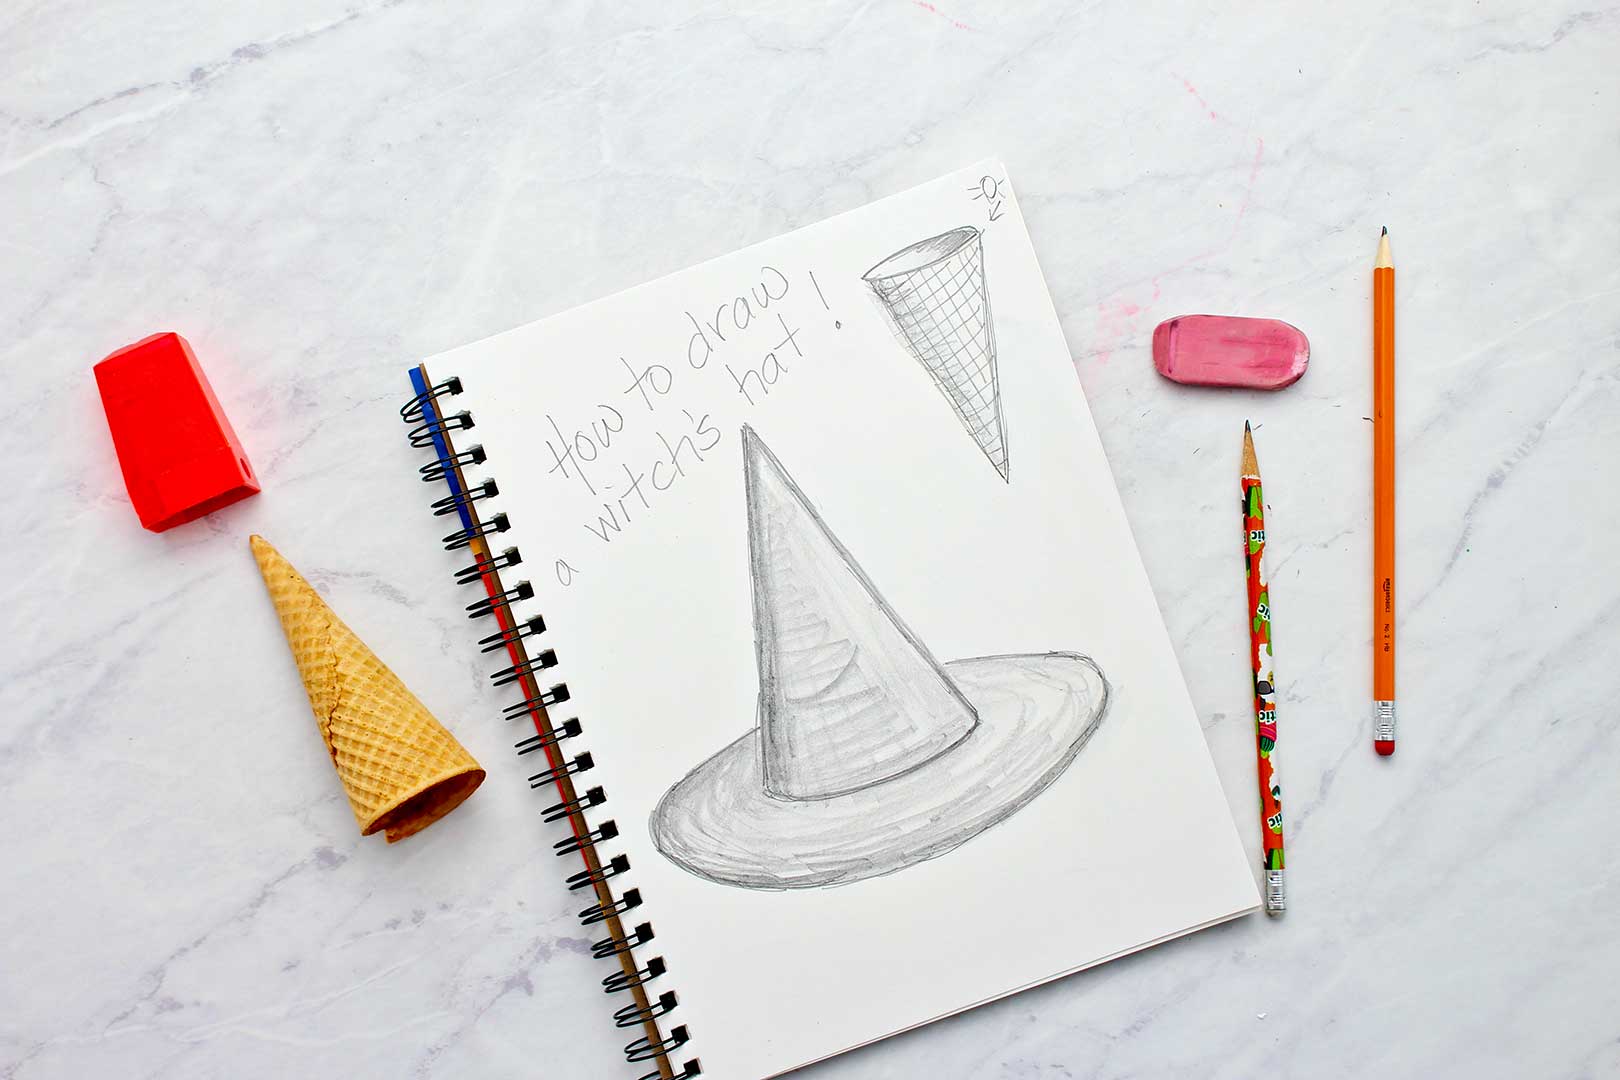 Completed sketch book page of witches hat and ice cream cone with pencils, pencil sharpener, eraser and ice cream cone resting near by.